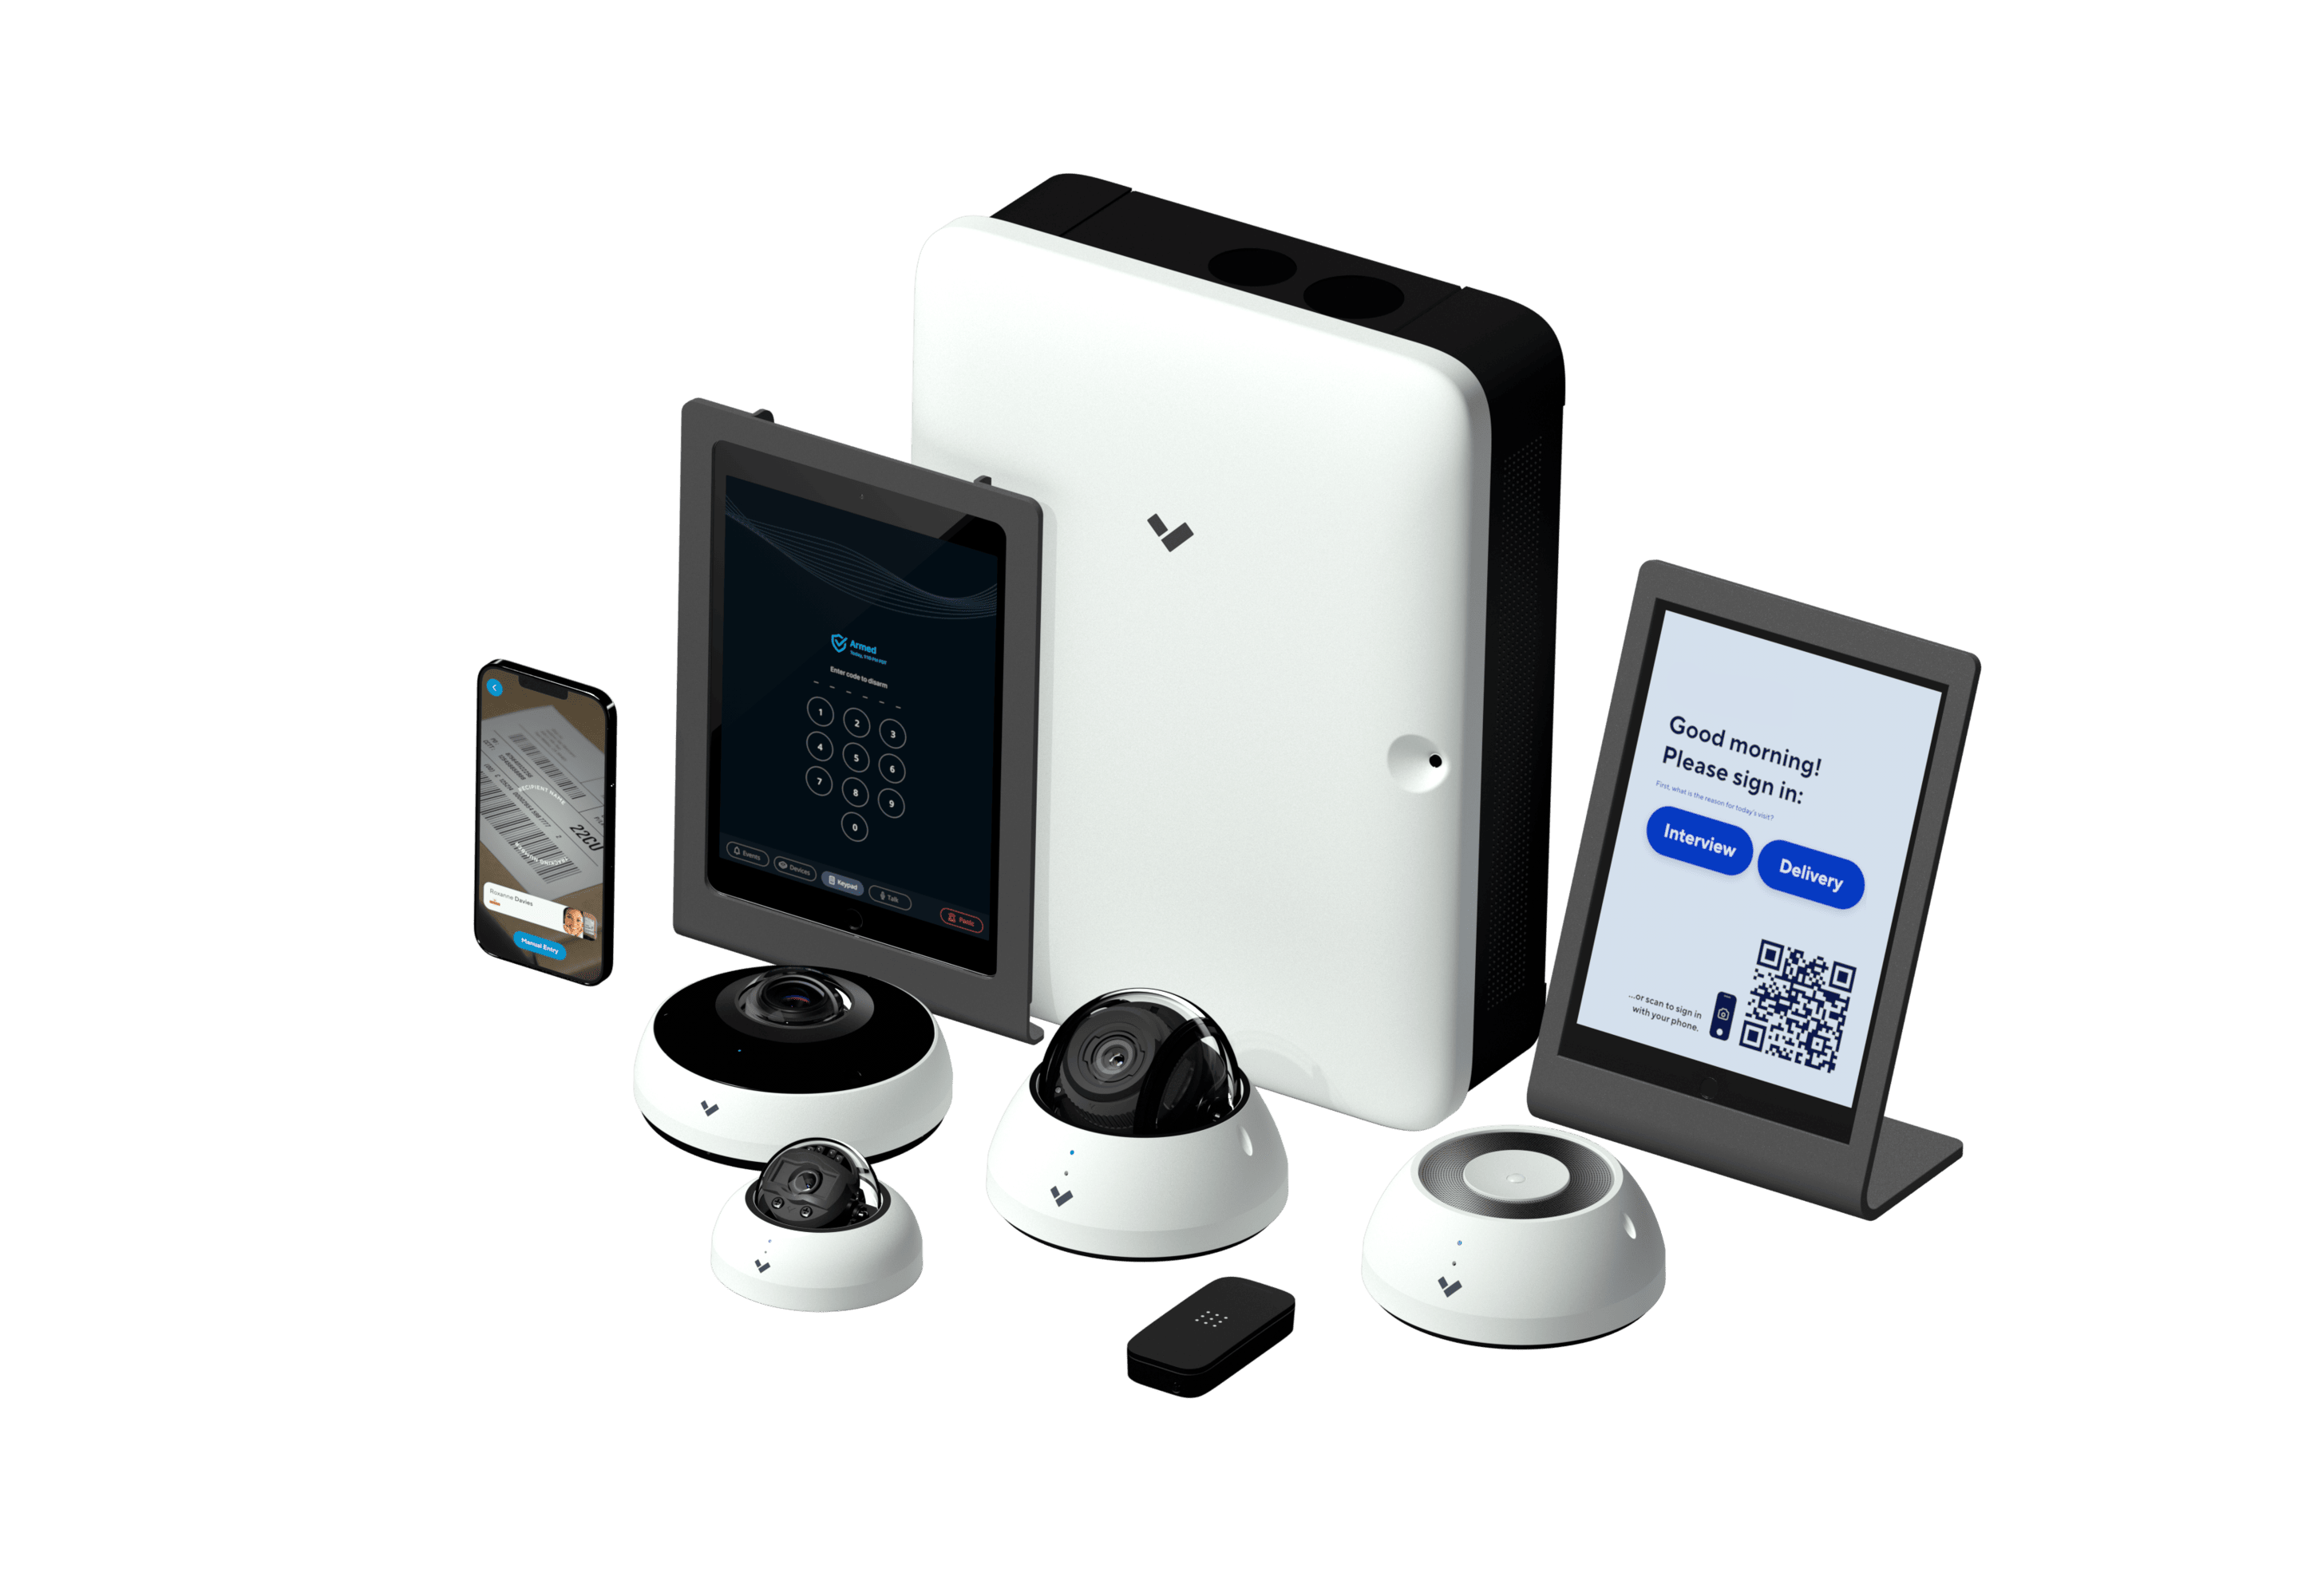 Verkada security camera family for businesses in the Gold Coast